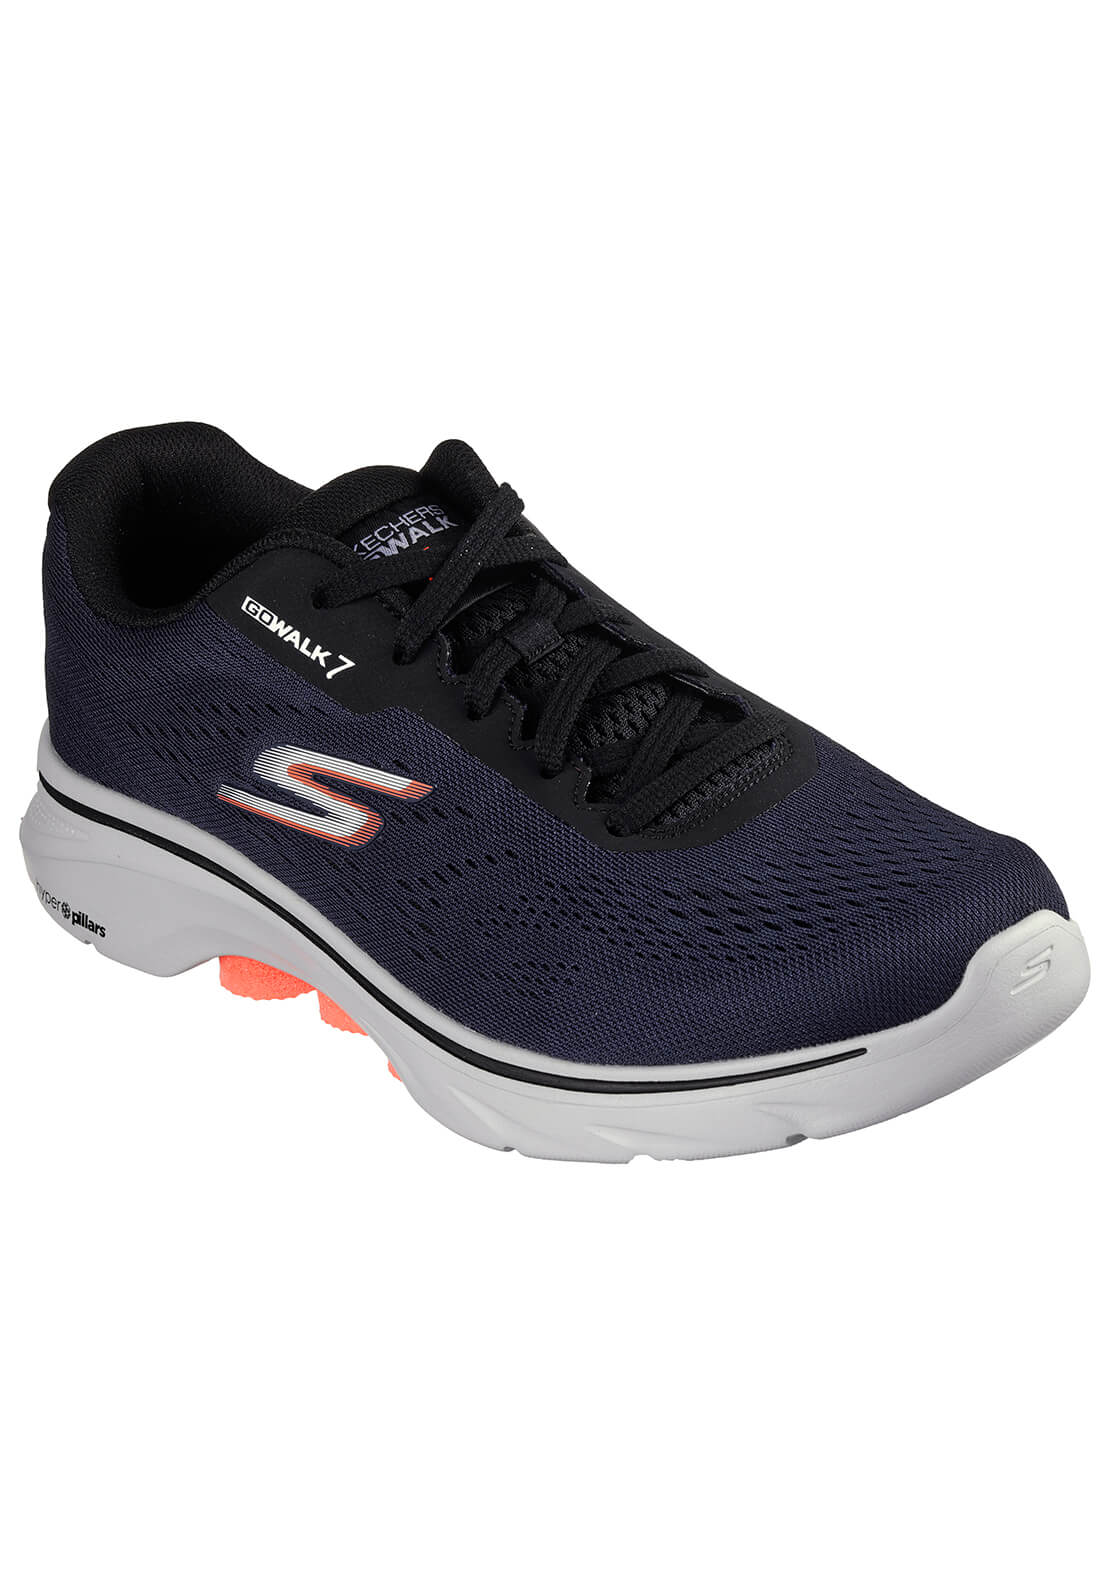 Skechers GO WALK 7™ The Construct - Navy &amp; Black 1 Shaws Department Stores